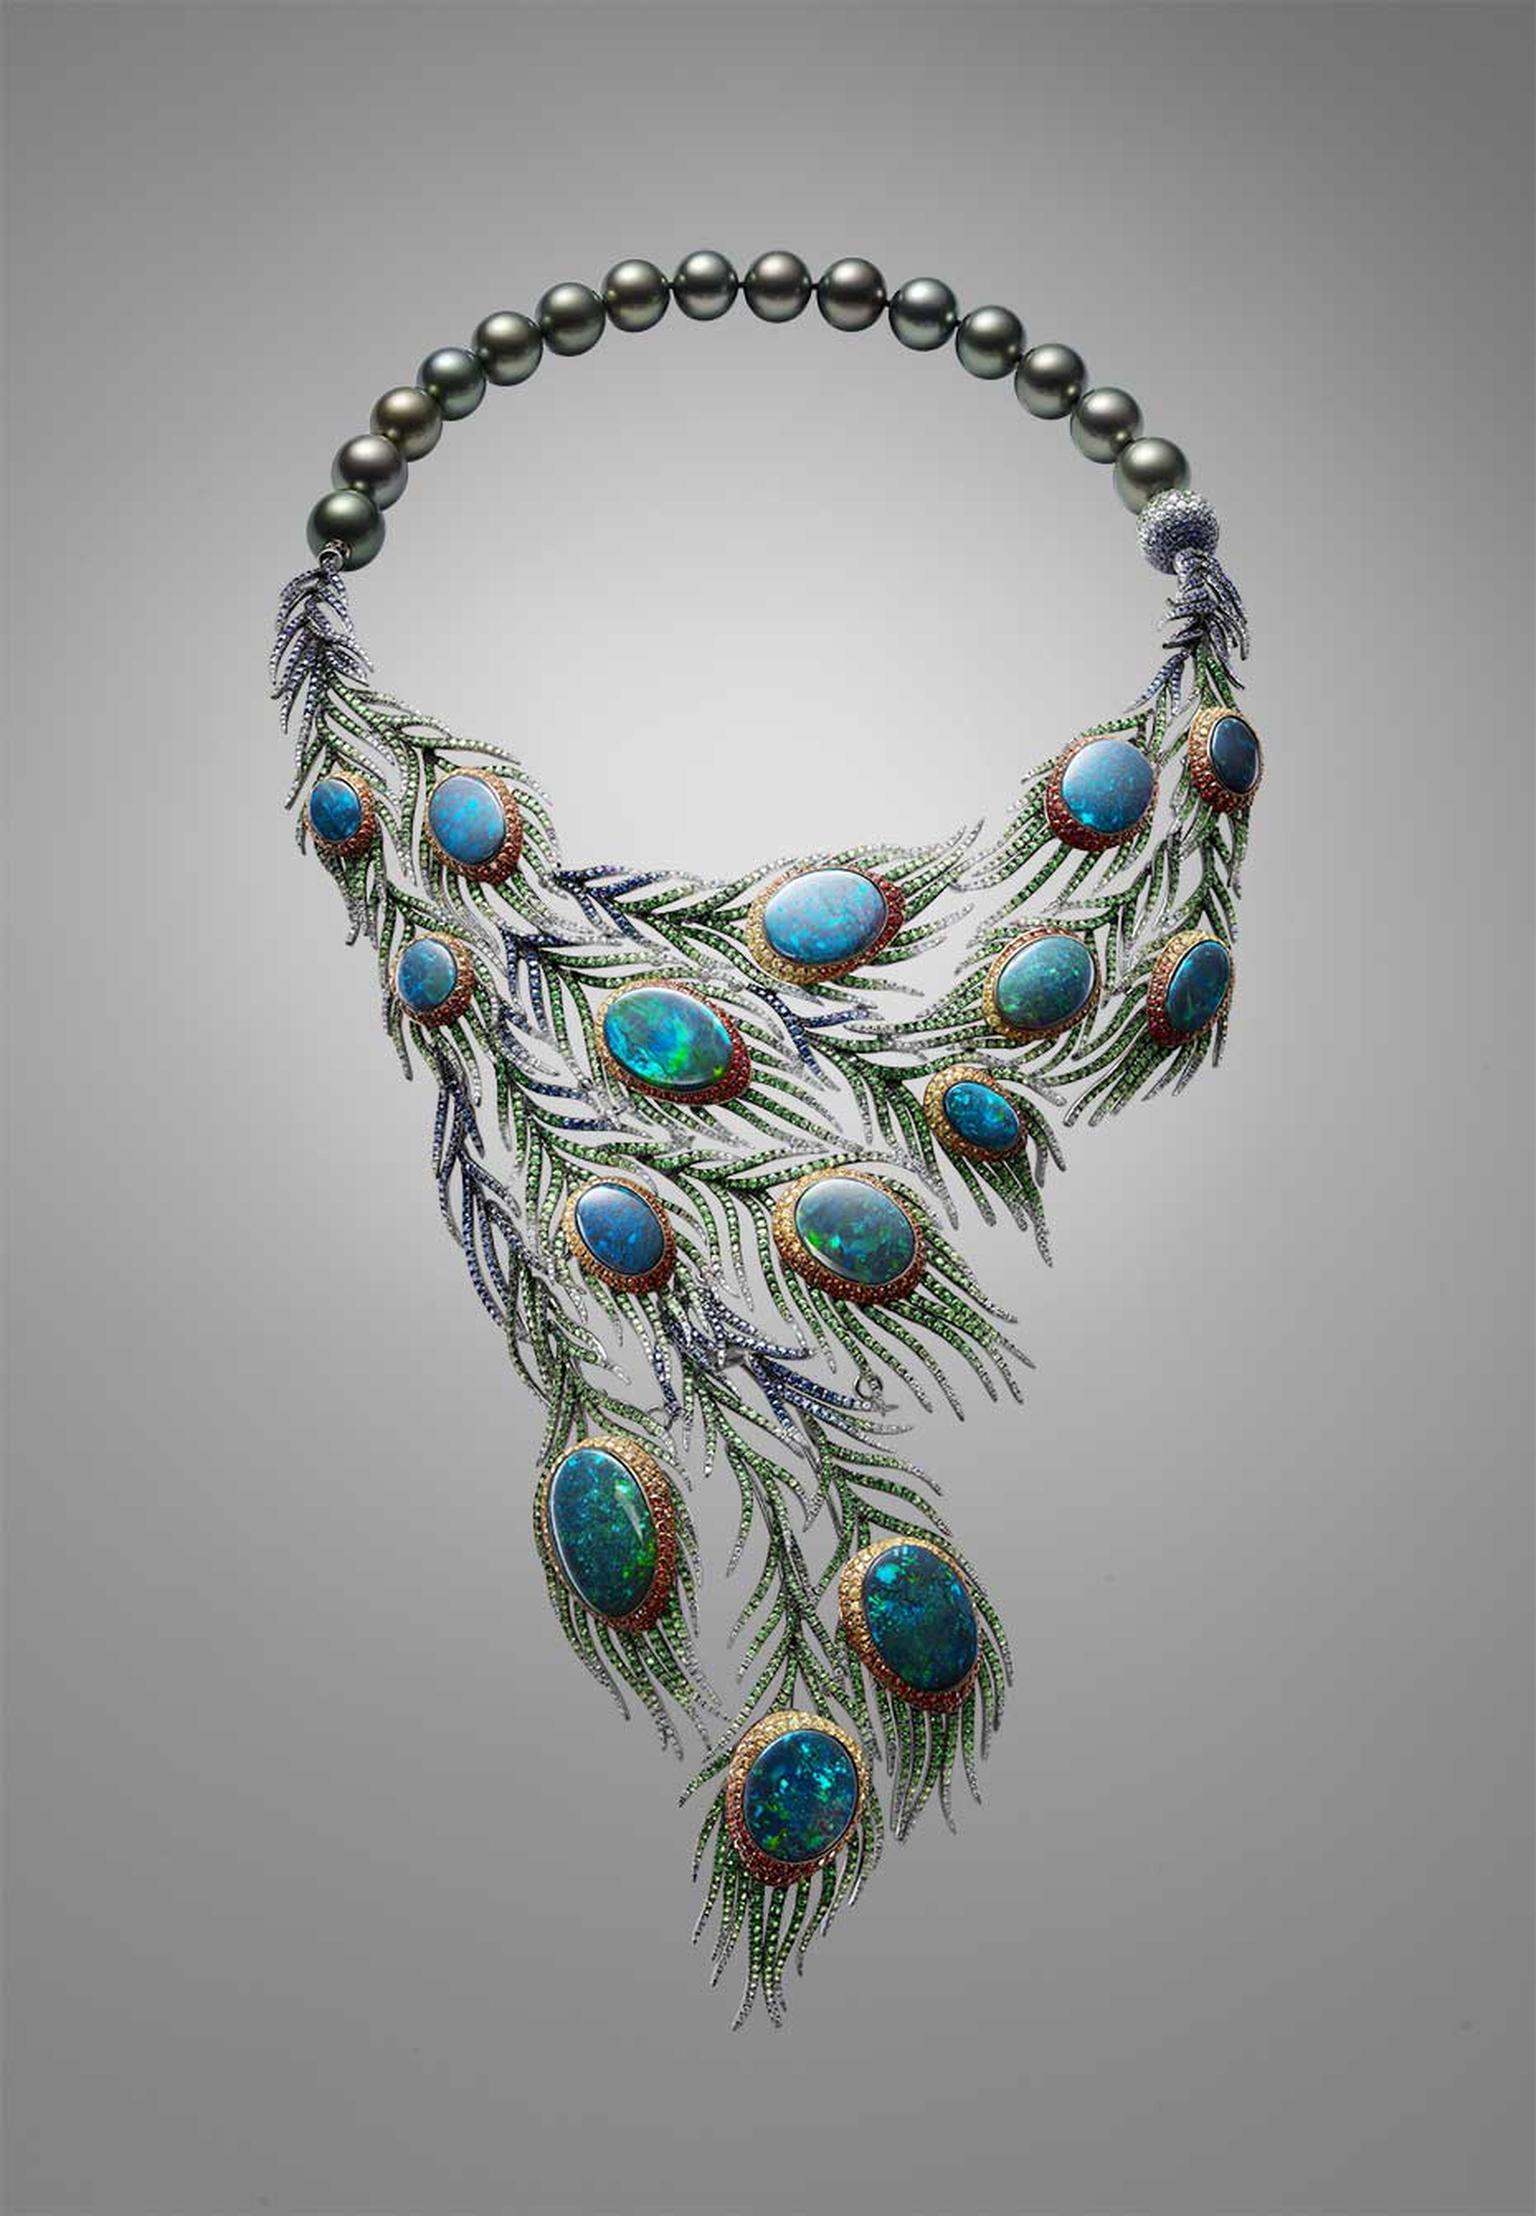 Part of a suite that includes earrings, a bangle and a ring, Alessio Boschi's Plumes necklace takes the peacock tail as its inspiration and uses 15 black opals as the centrepieces of cascading and movable feathers.